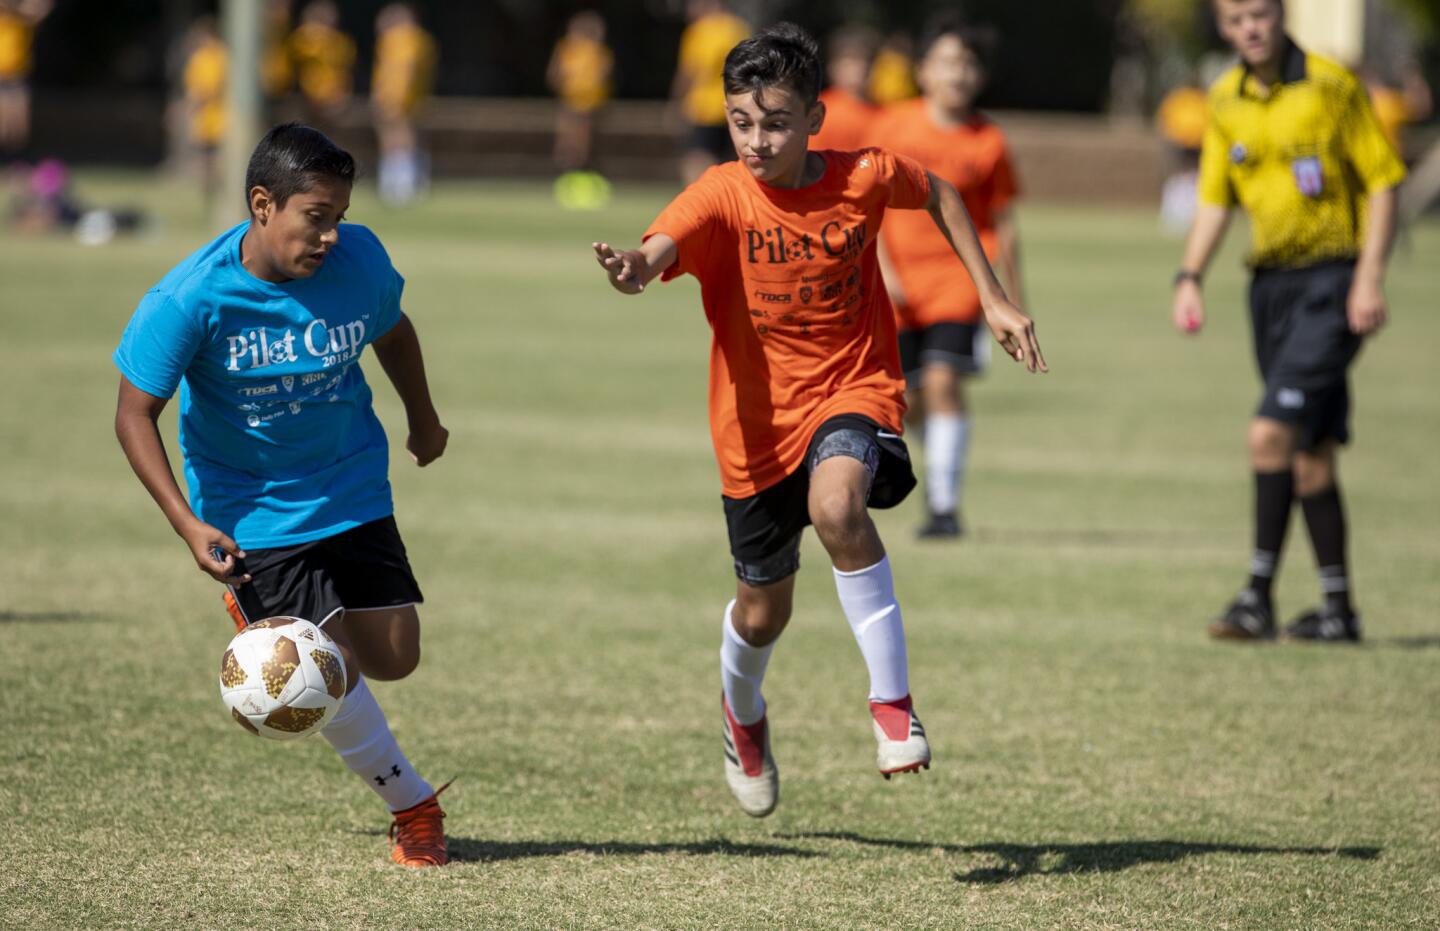 Photo Gallery: Davis A vs. College Park A at the Daily Pilot Cup